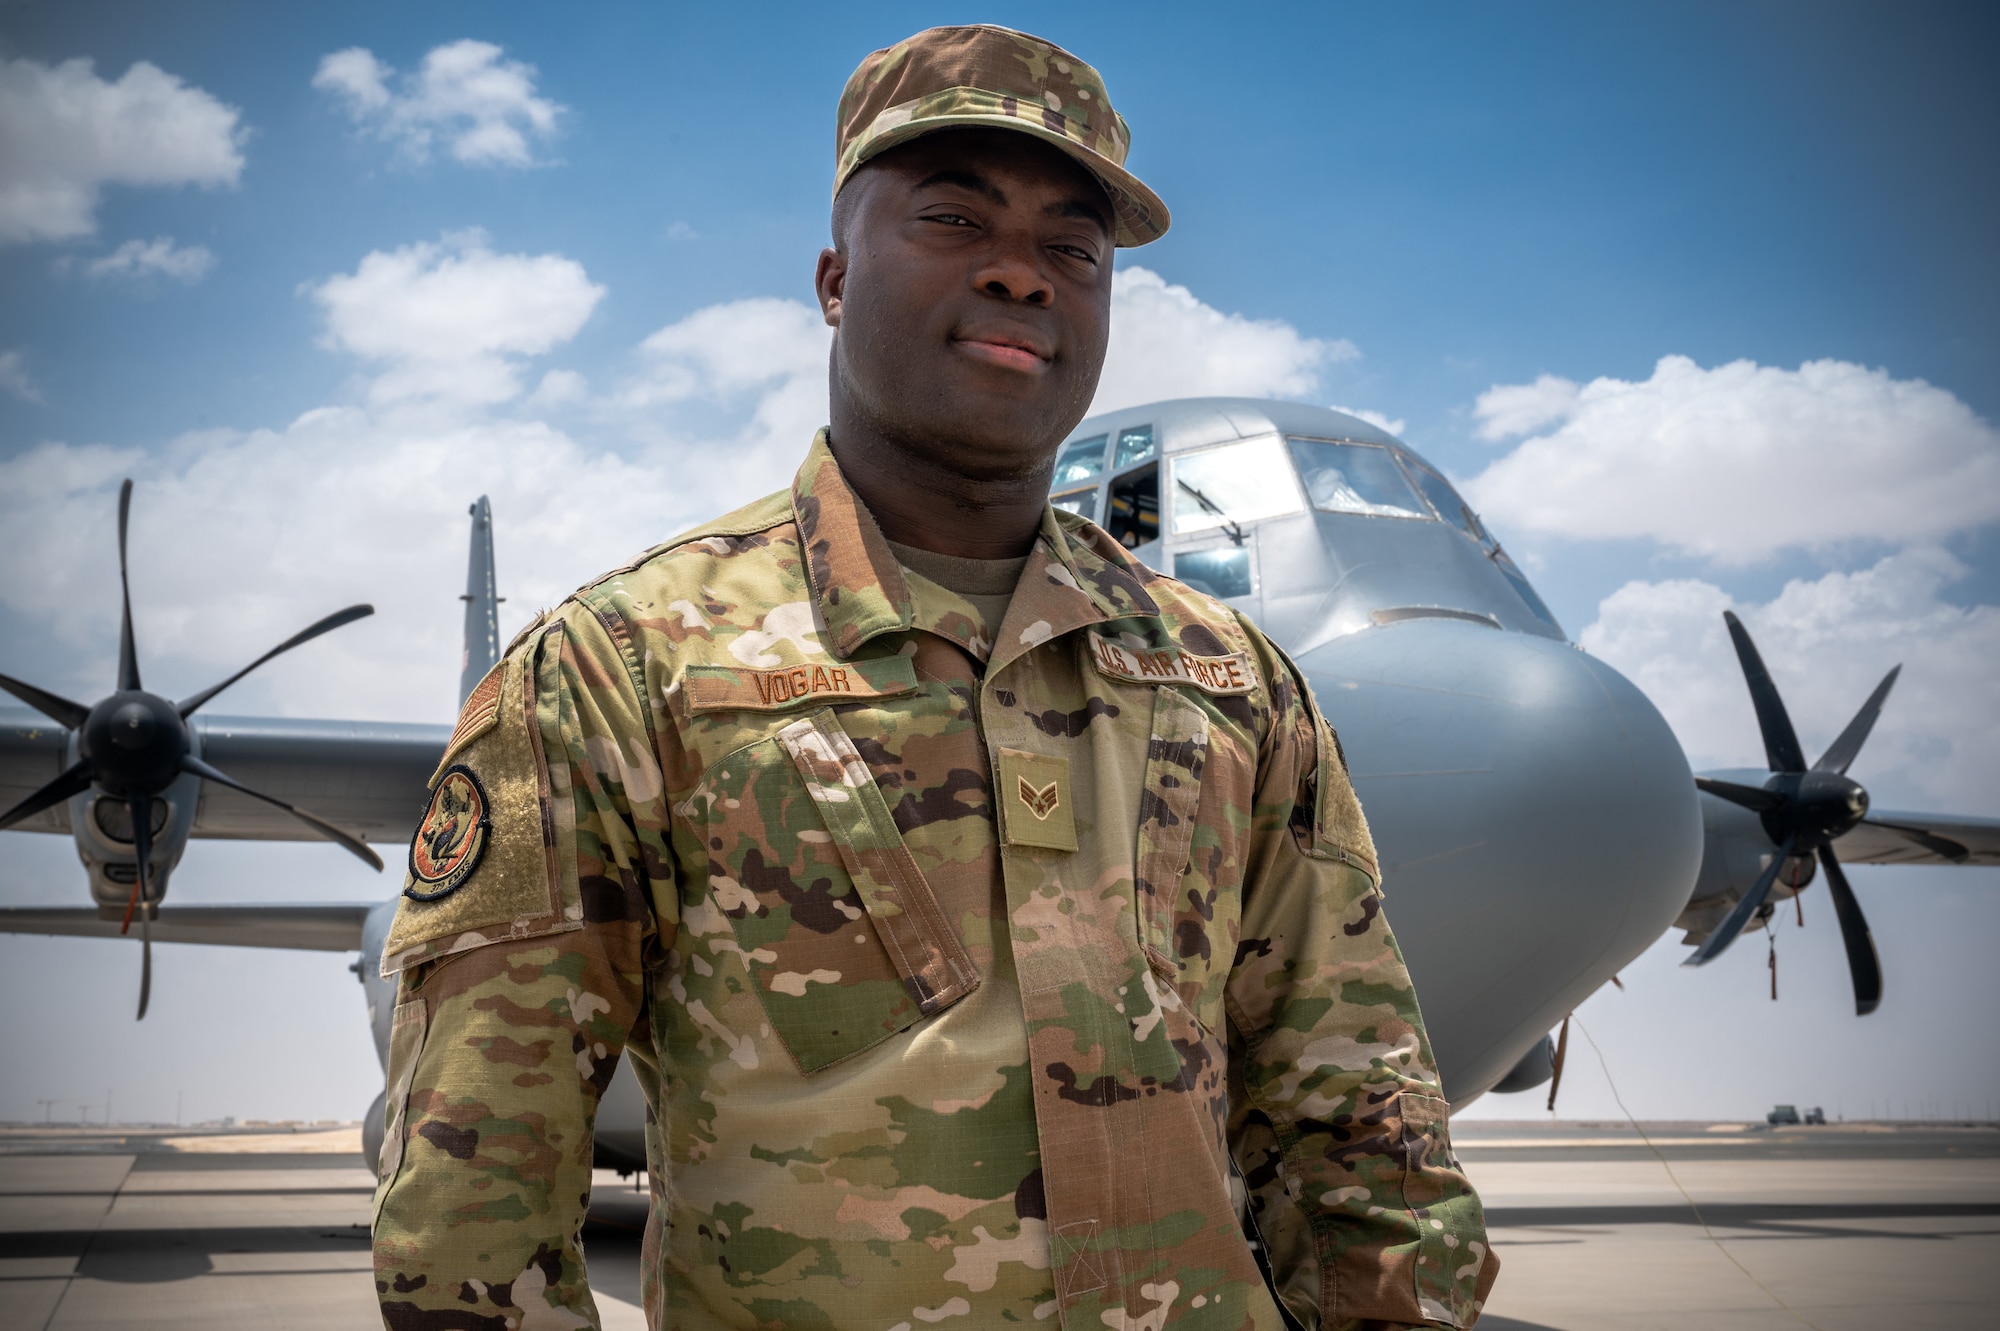 Senior Airman Ajay Vogar, 379th Expeditionary Maintenance Squadron commander support staff security manager, poses for a photo at Al Udeid Air Base, Qatar, July 19, 2021.